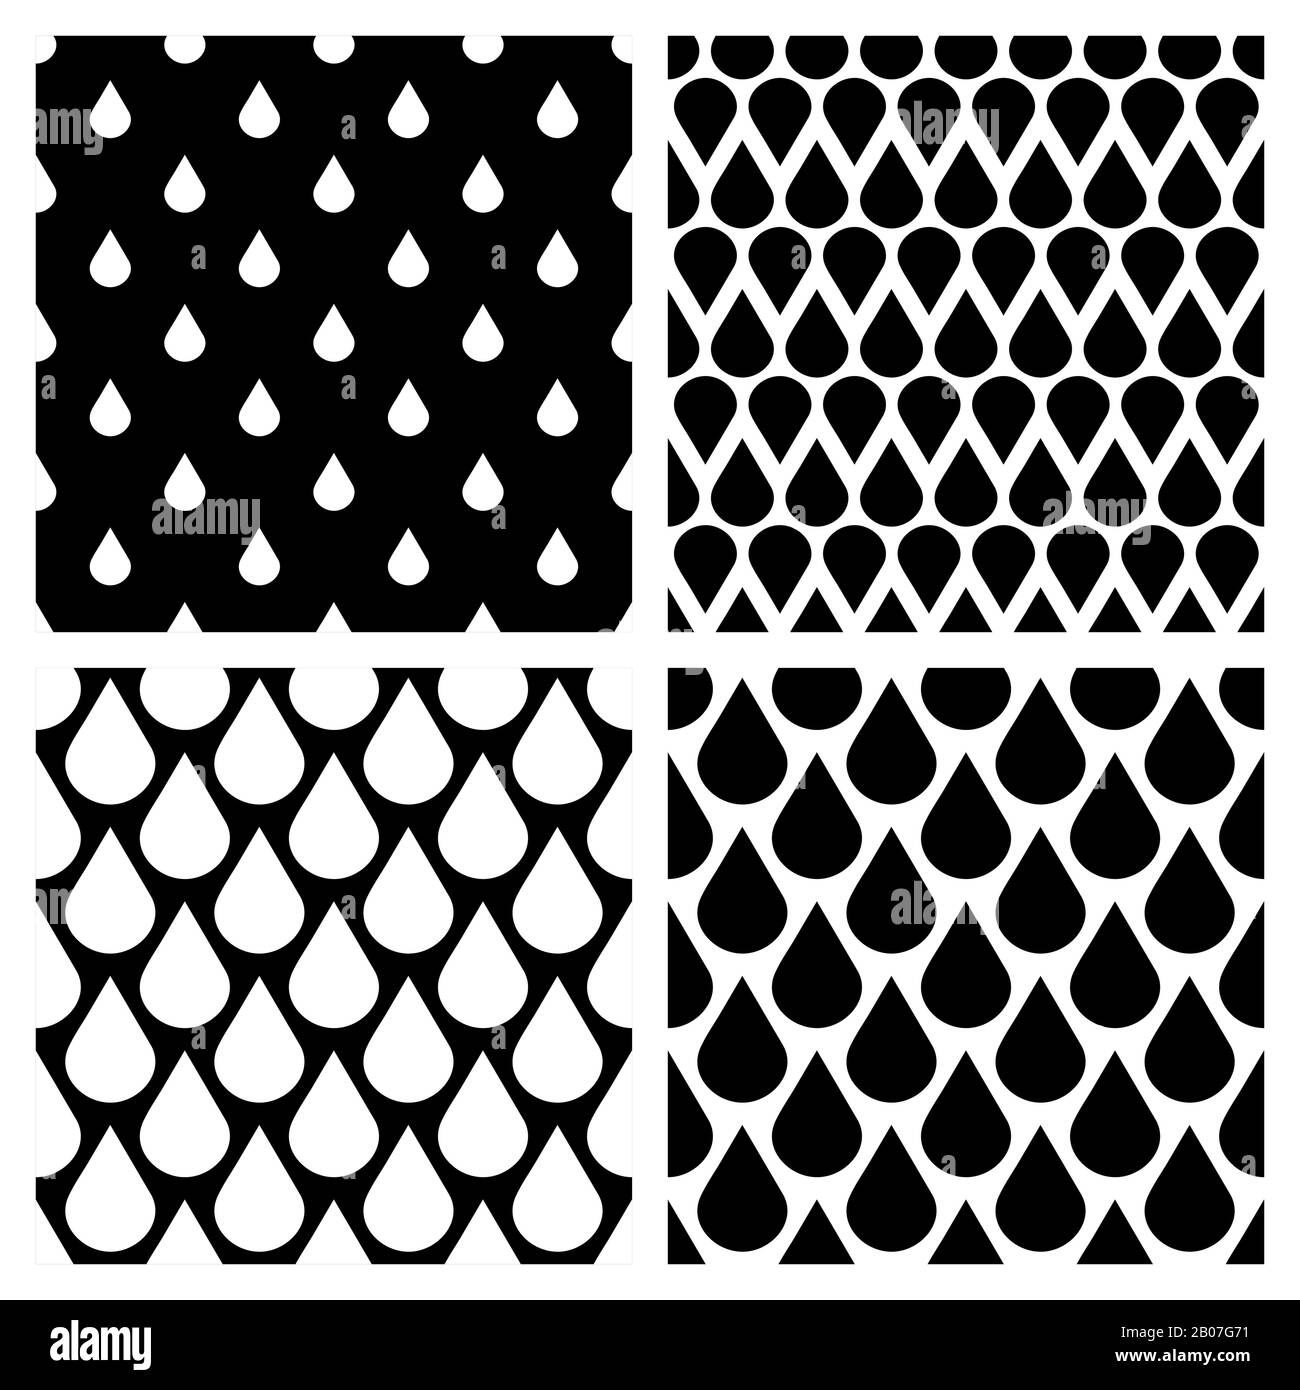 Set of vector water drops seamless patterns in black and white. Background rain water illustration Stock Vector